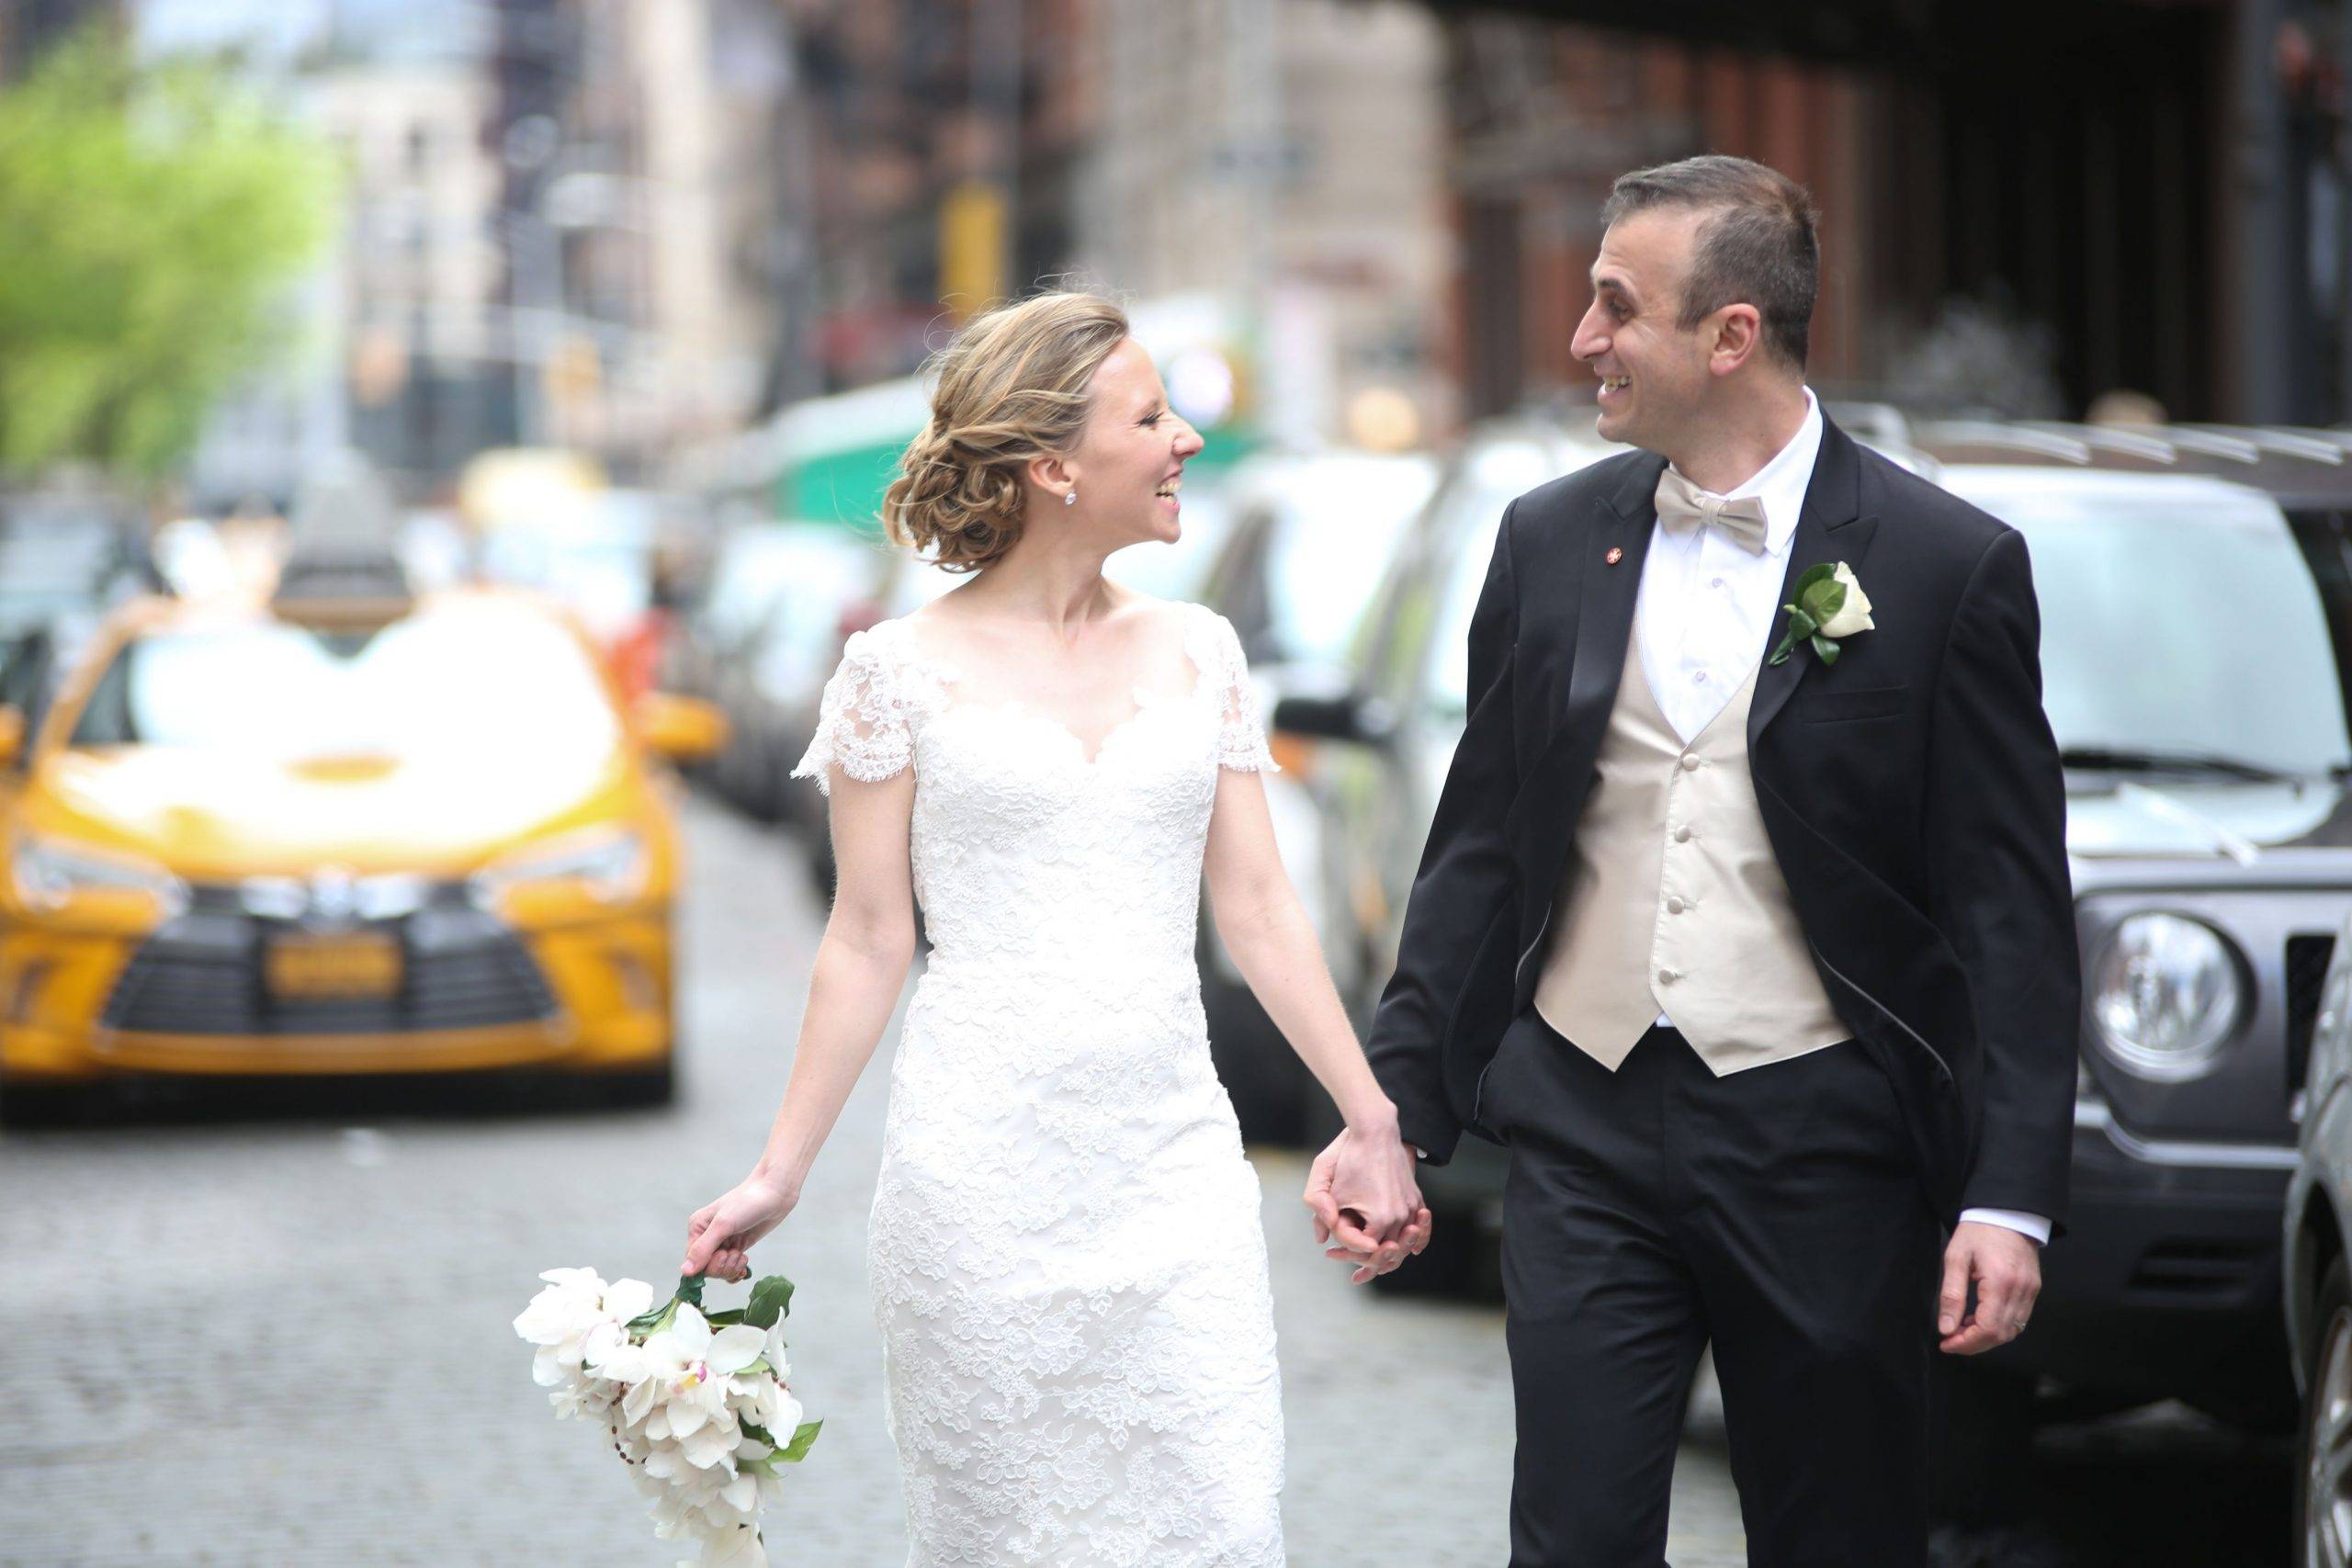 A bride and groom walking down a city street.